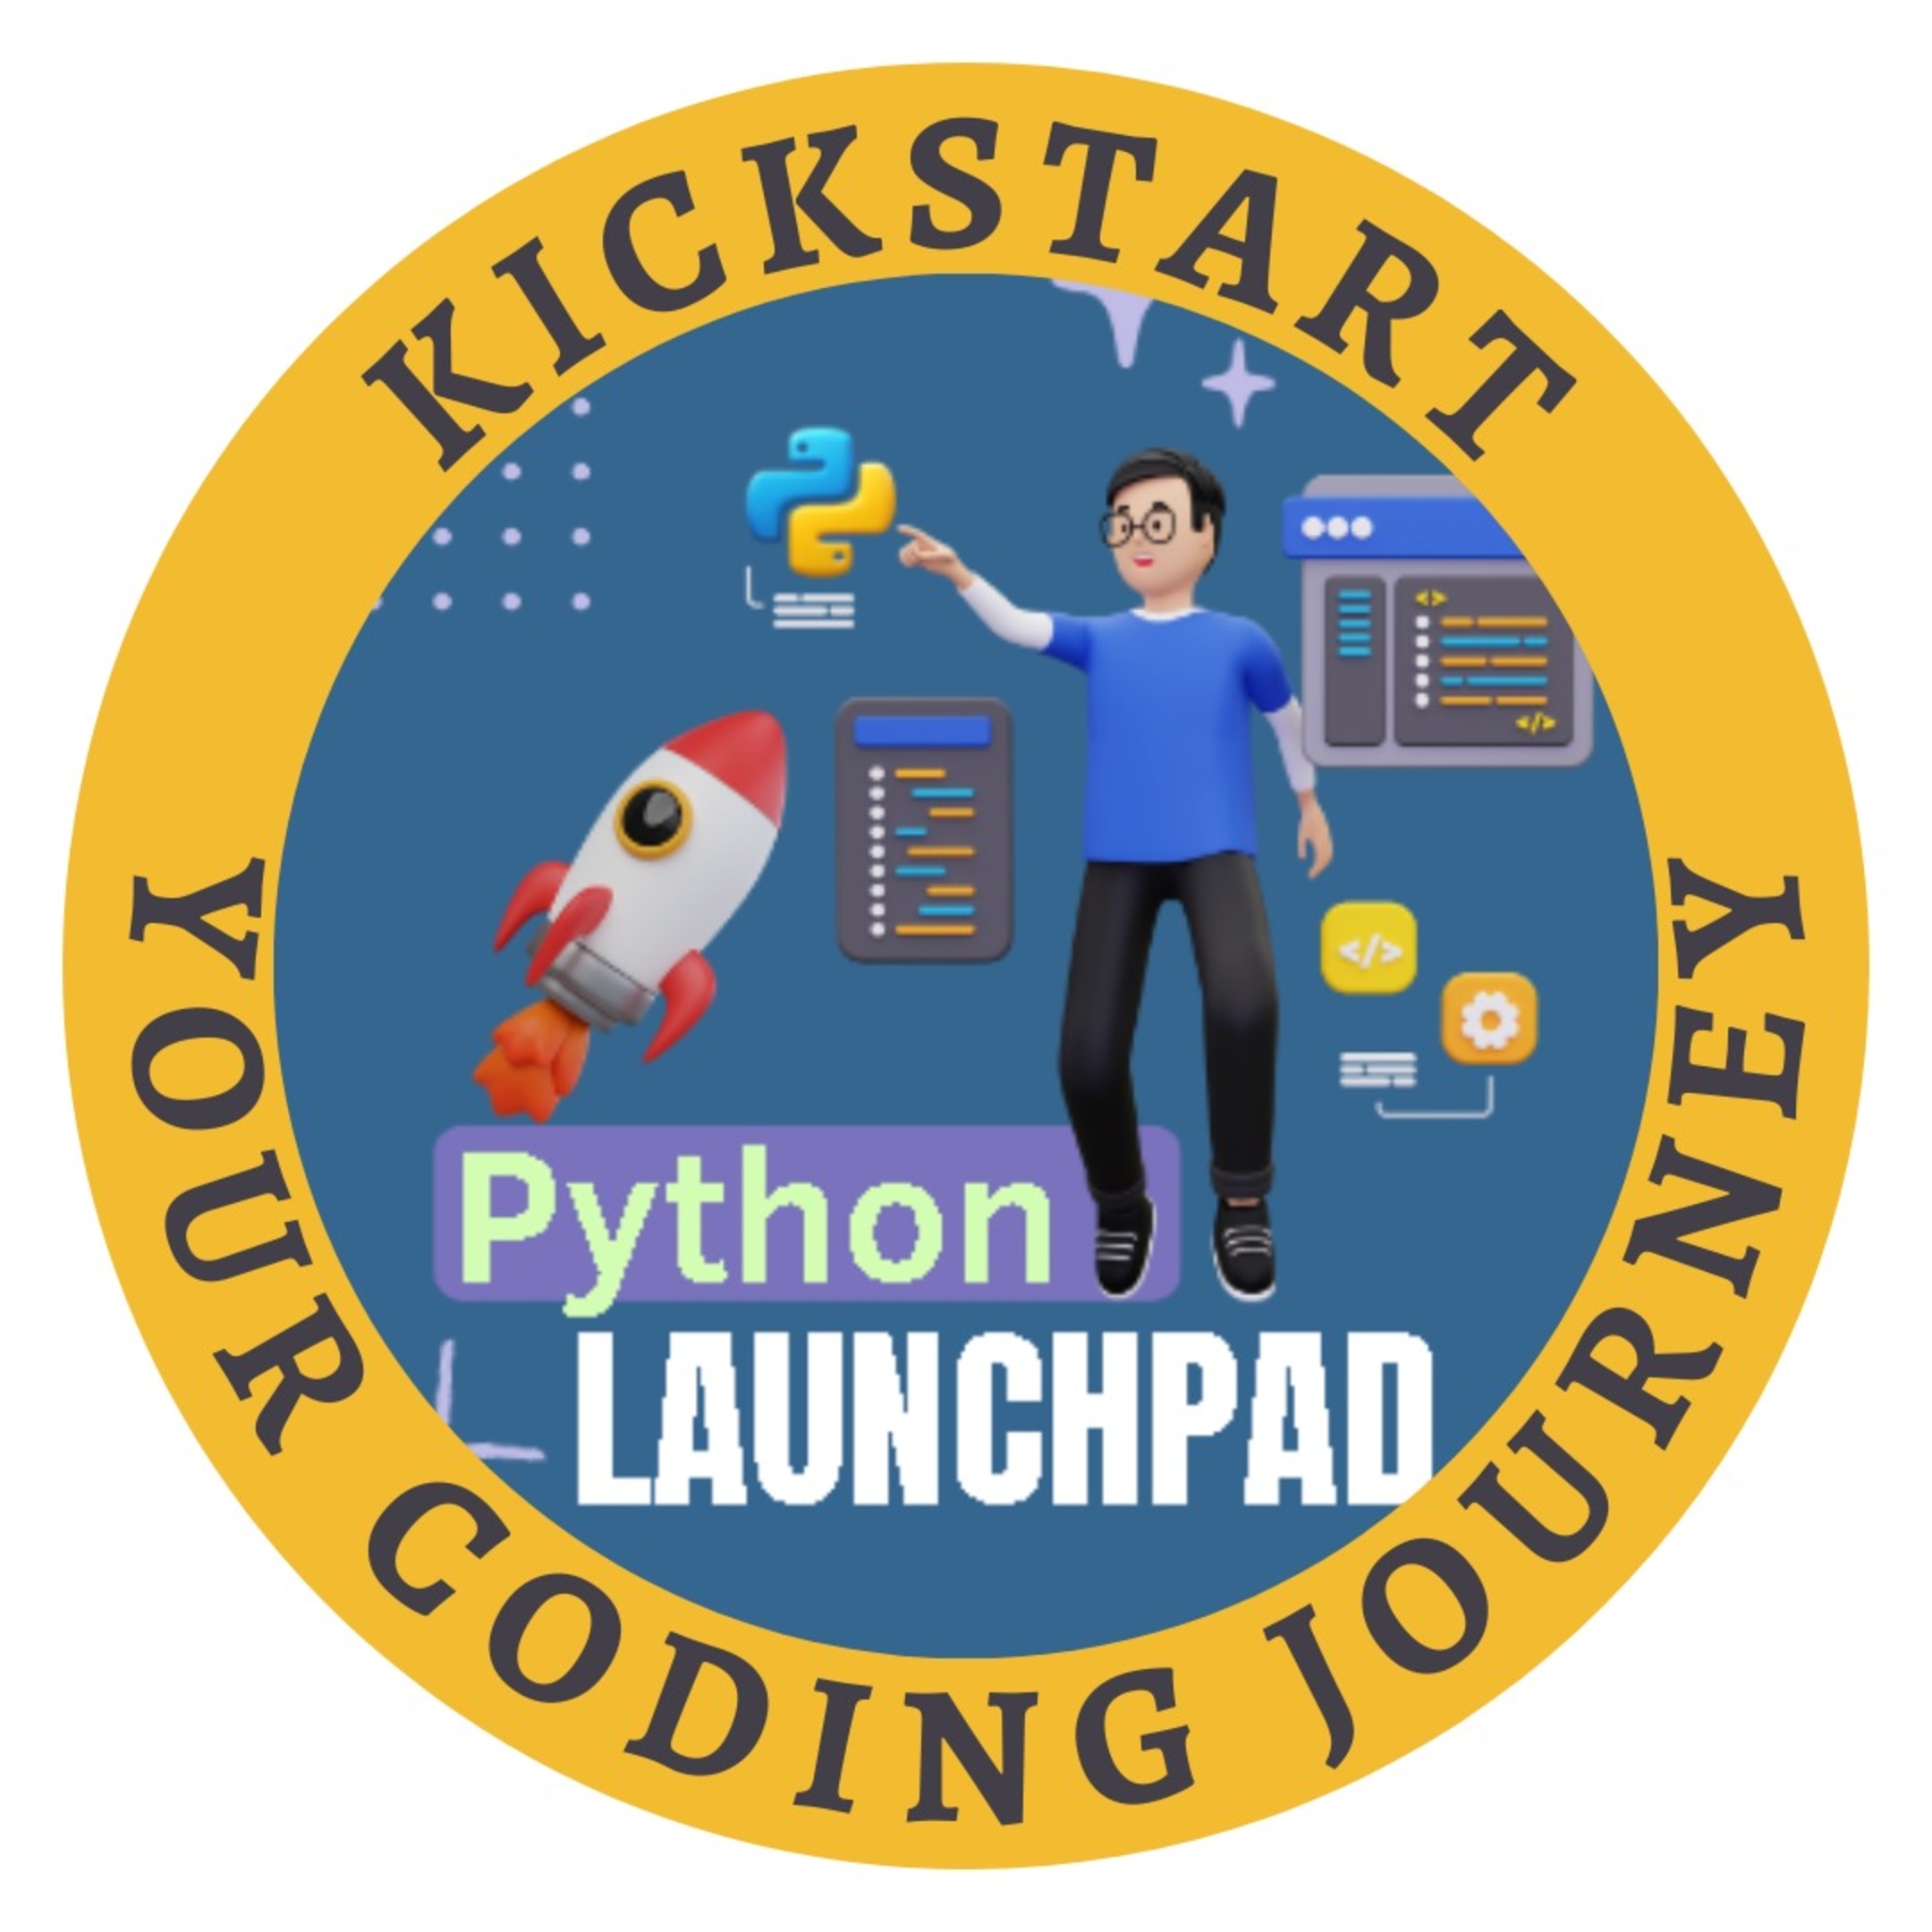 Your Coding Journey Starts with Python